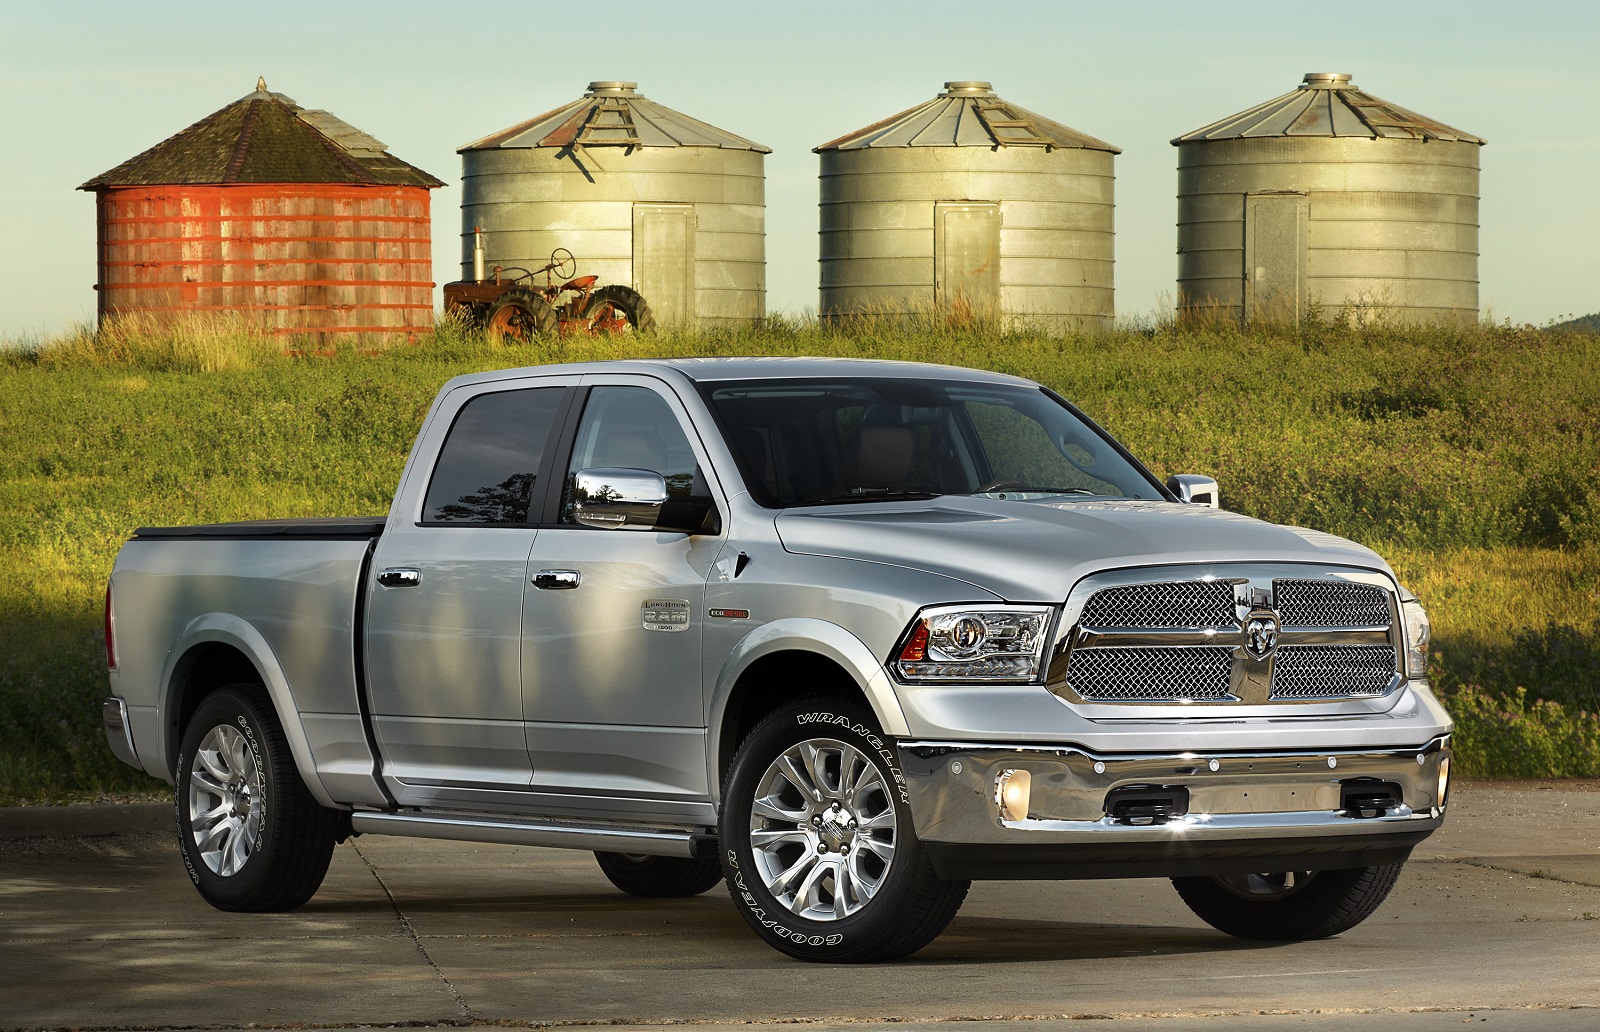 2014 Ram 1500 Ratings, Specs, Prices, and Photos - The Car Connection